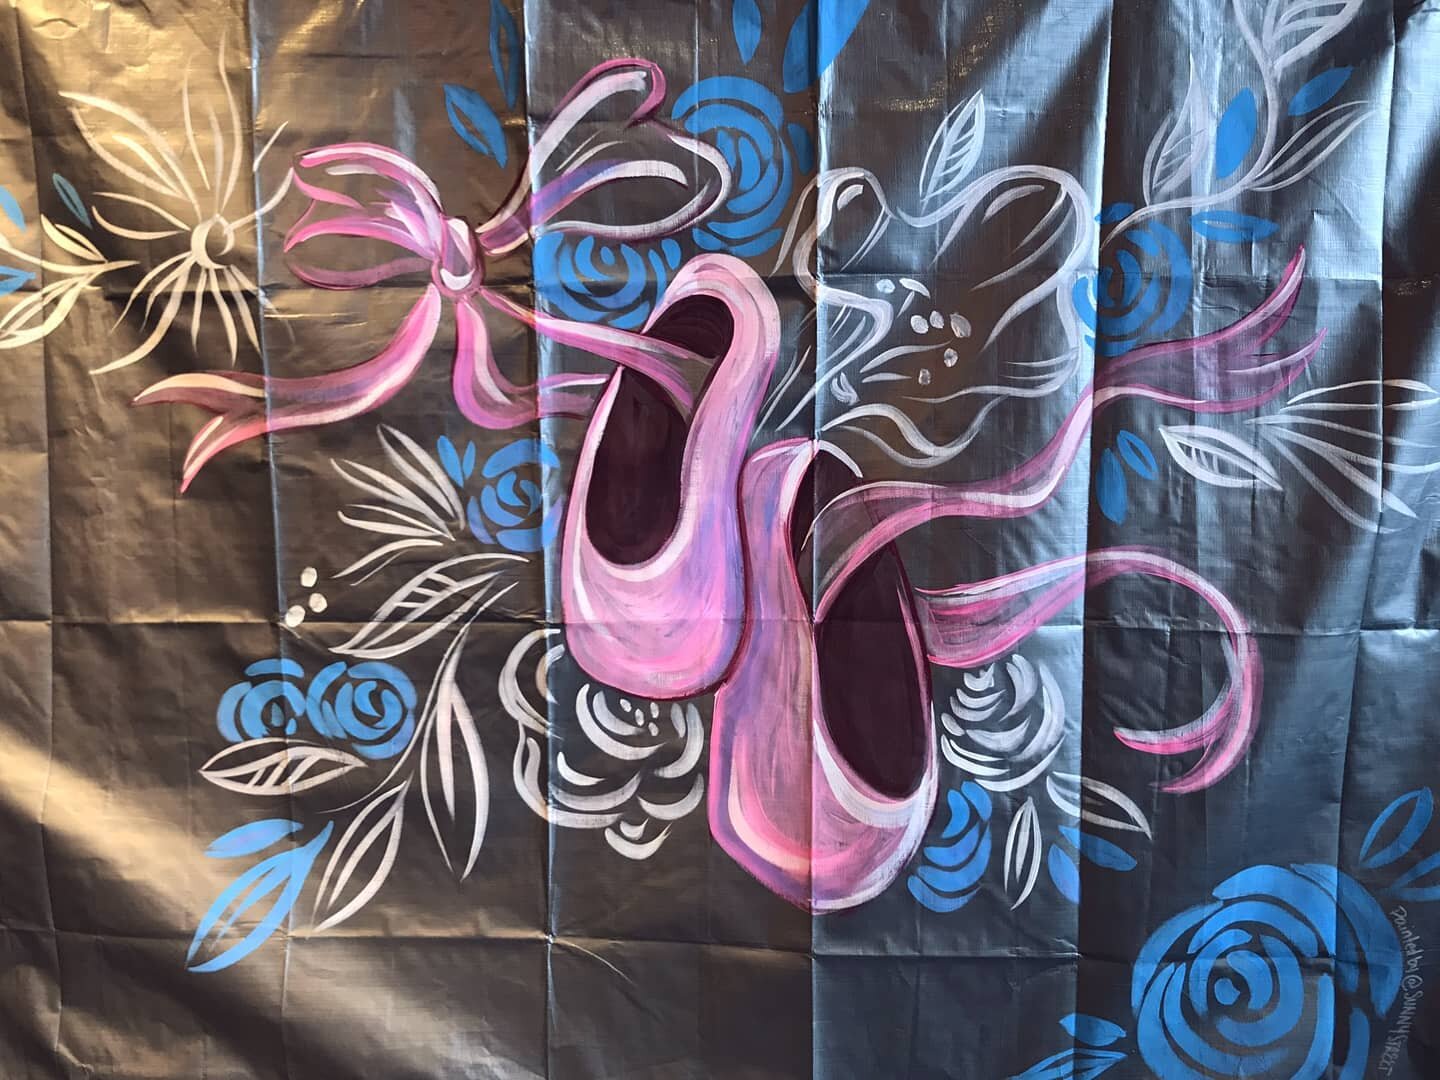 Throwback to this dance-themed mini-mural created last summer for @brio.bodywear 🩰🌸💃 it took about an hour to transform this basic tarp divider into a bright and colourful backdrop!

Murals don't have to be big or complicated to transform a space.